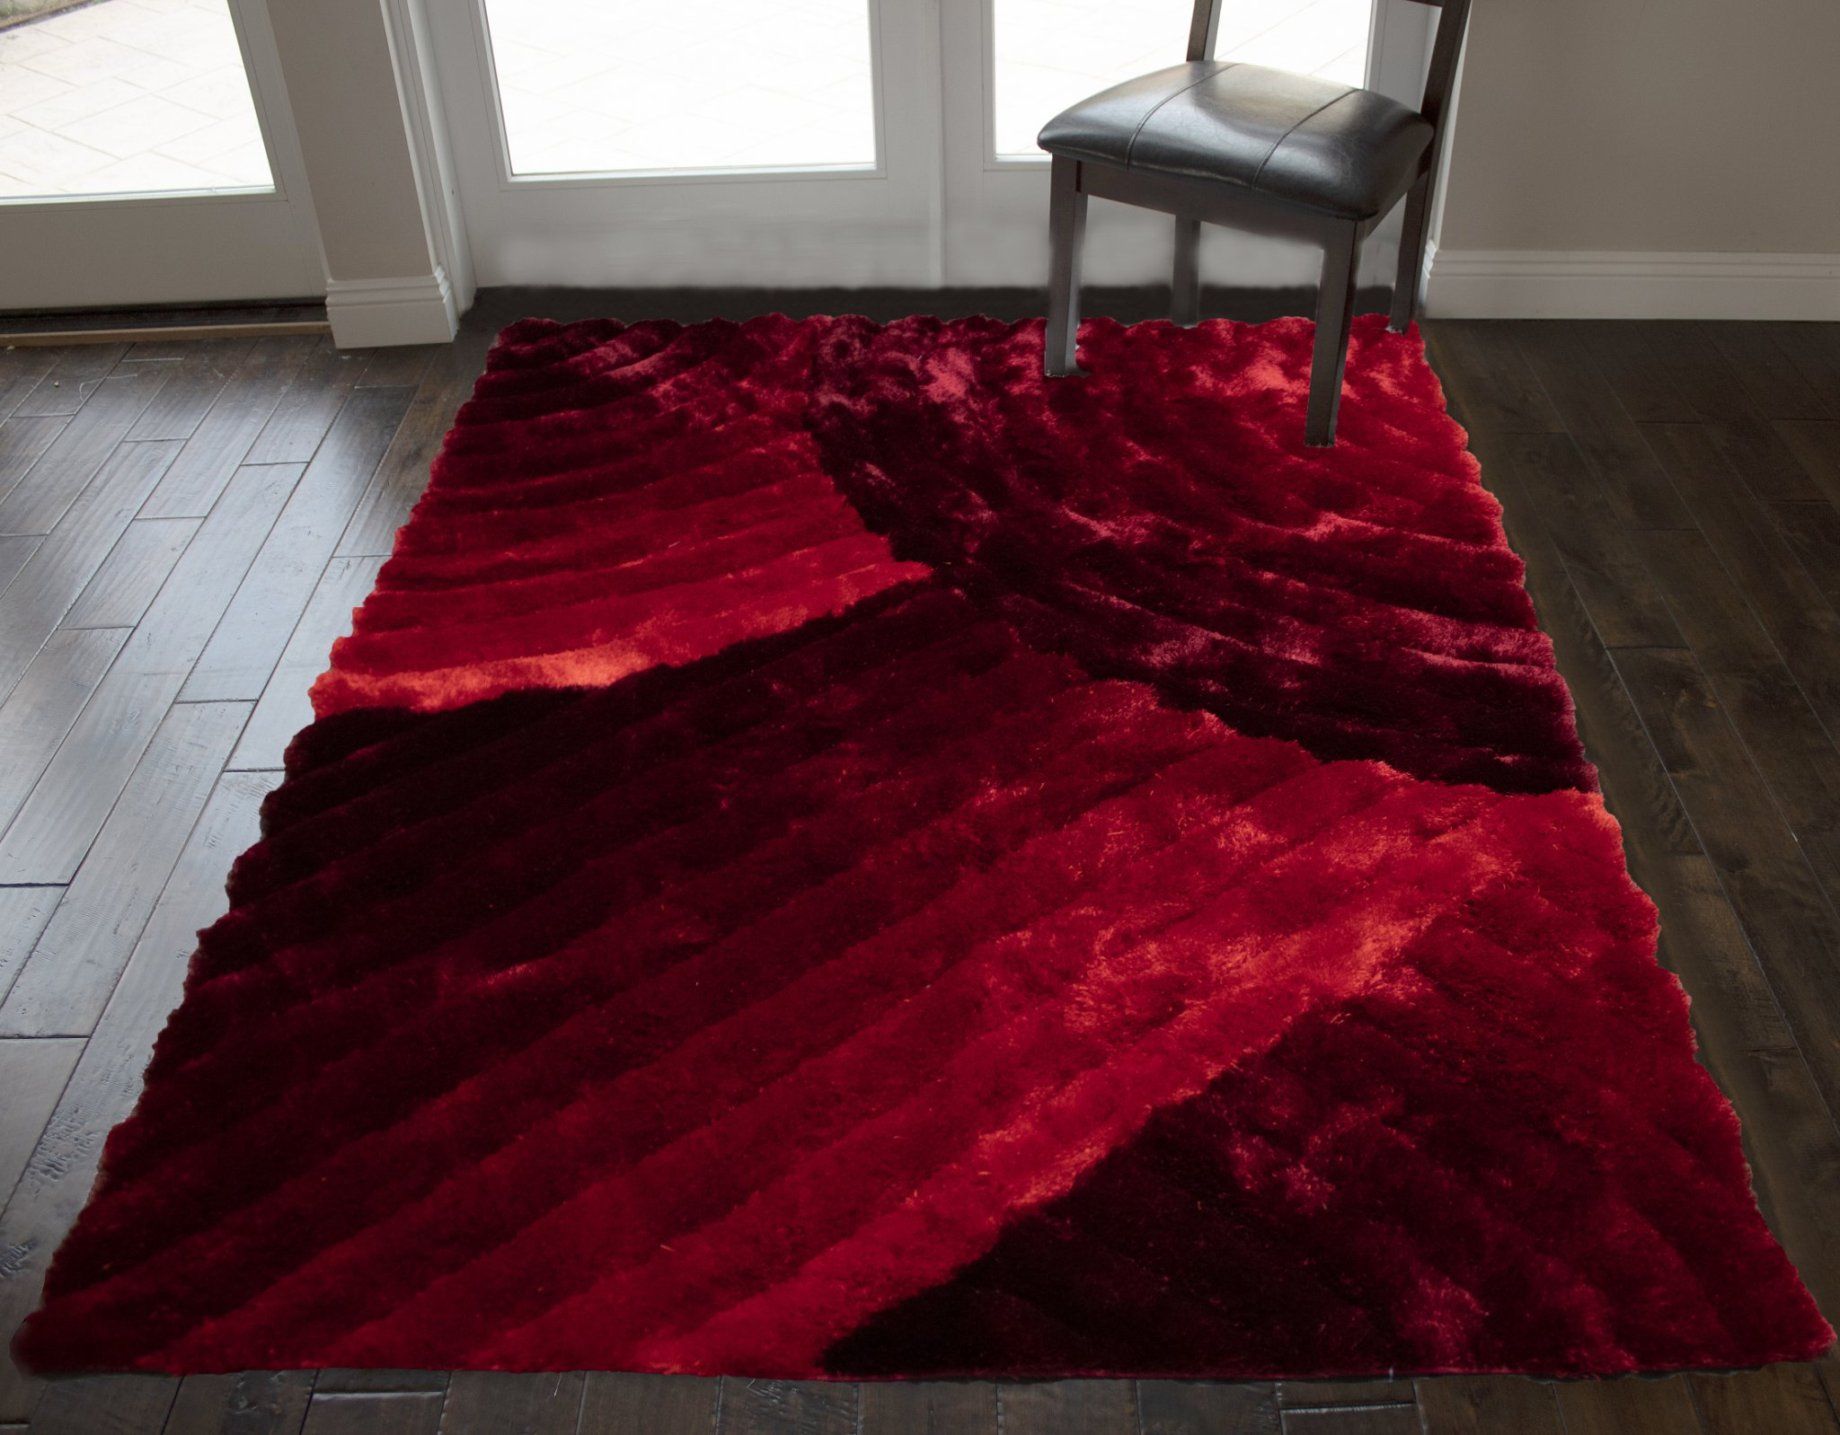 Red Deep Red Lipstick Red Bright Red Two Tone Color Shaggy Shag Area Rug 8  X 10 High End Designer Look Pile Height Solid Fuzzy Quality Carpet Bedroom  Bathroom Living Room – Walmart Within Red Solid Shag Rugs (View 15 of 15)